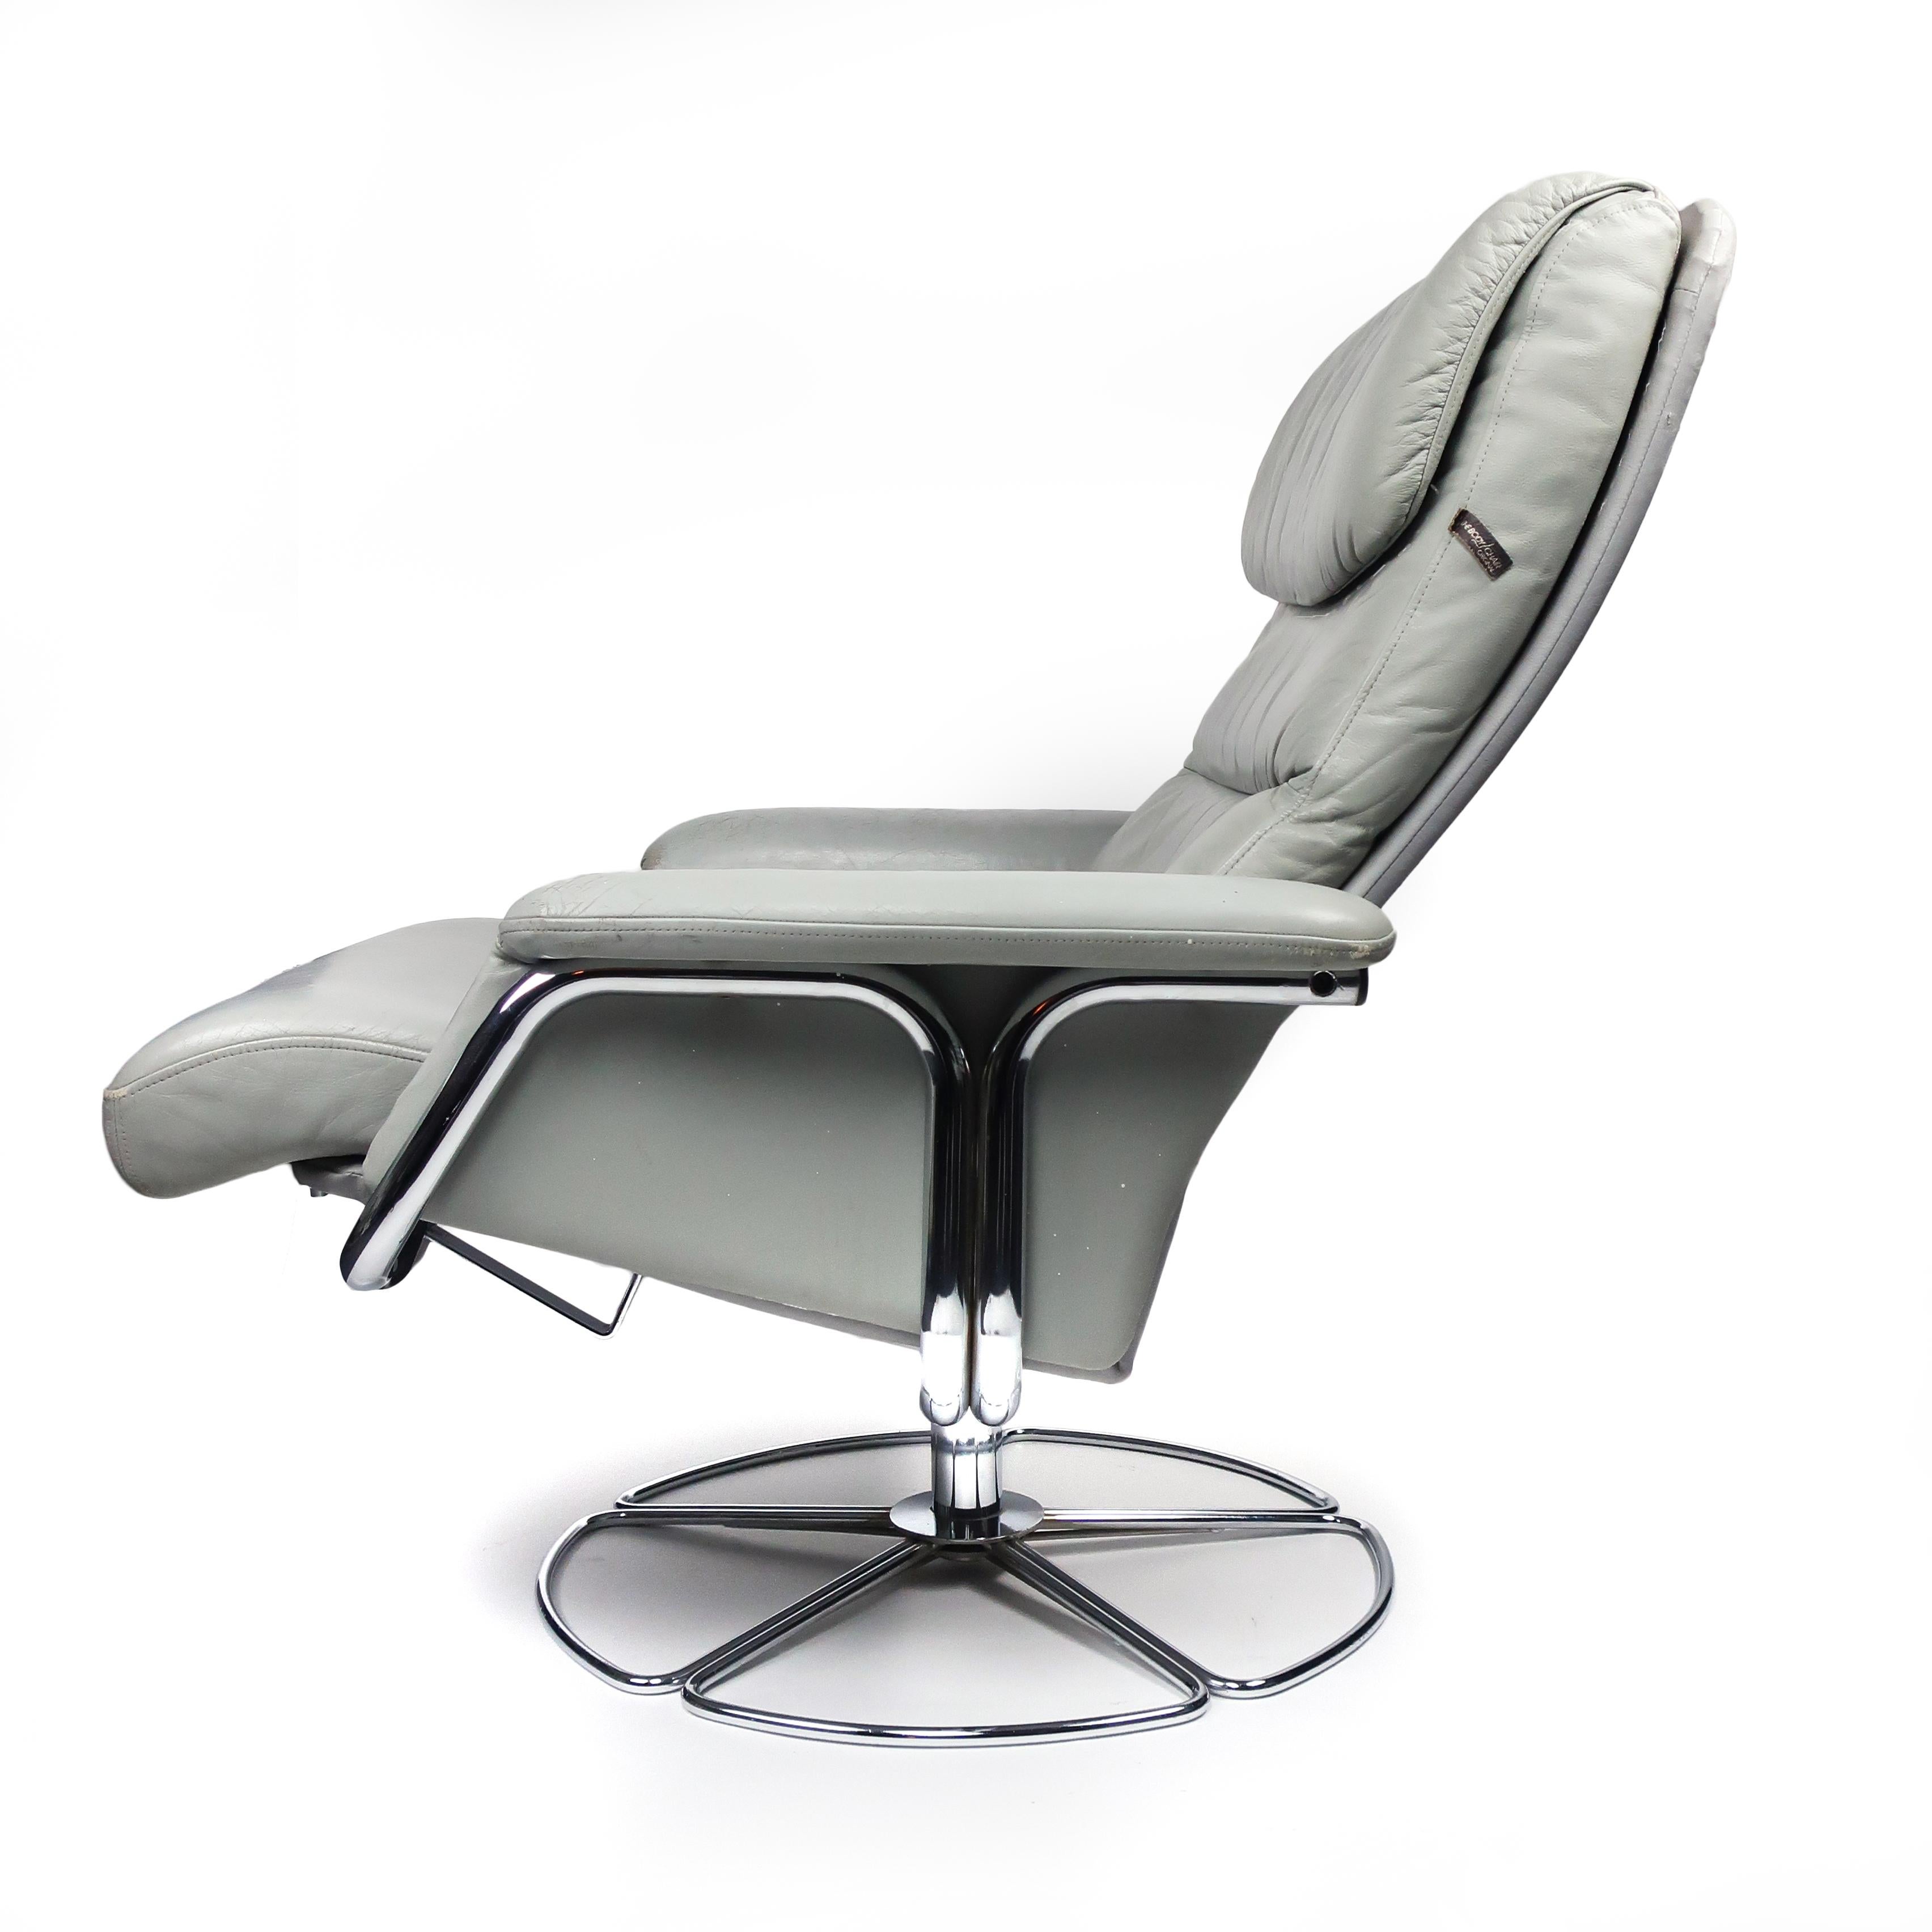 A vintage 1970s gray leather and chrome lounge chair and foot stool by Bruno Mathsson for DUX. With a lovely silhouette, this chair swivels and lays almost flat when reclined, making it incredibly comfortable. Labeled on side of the chair’s back